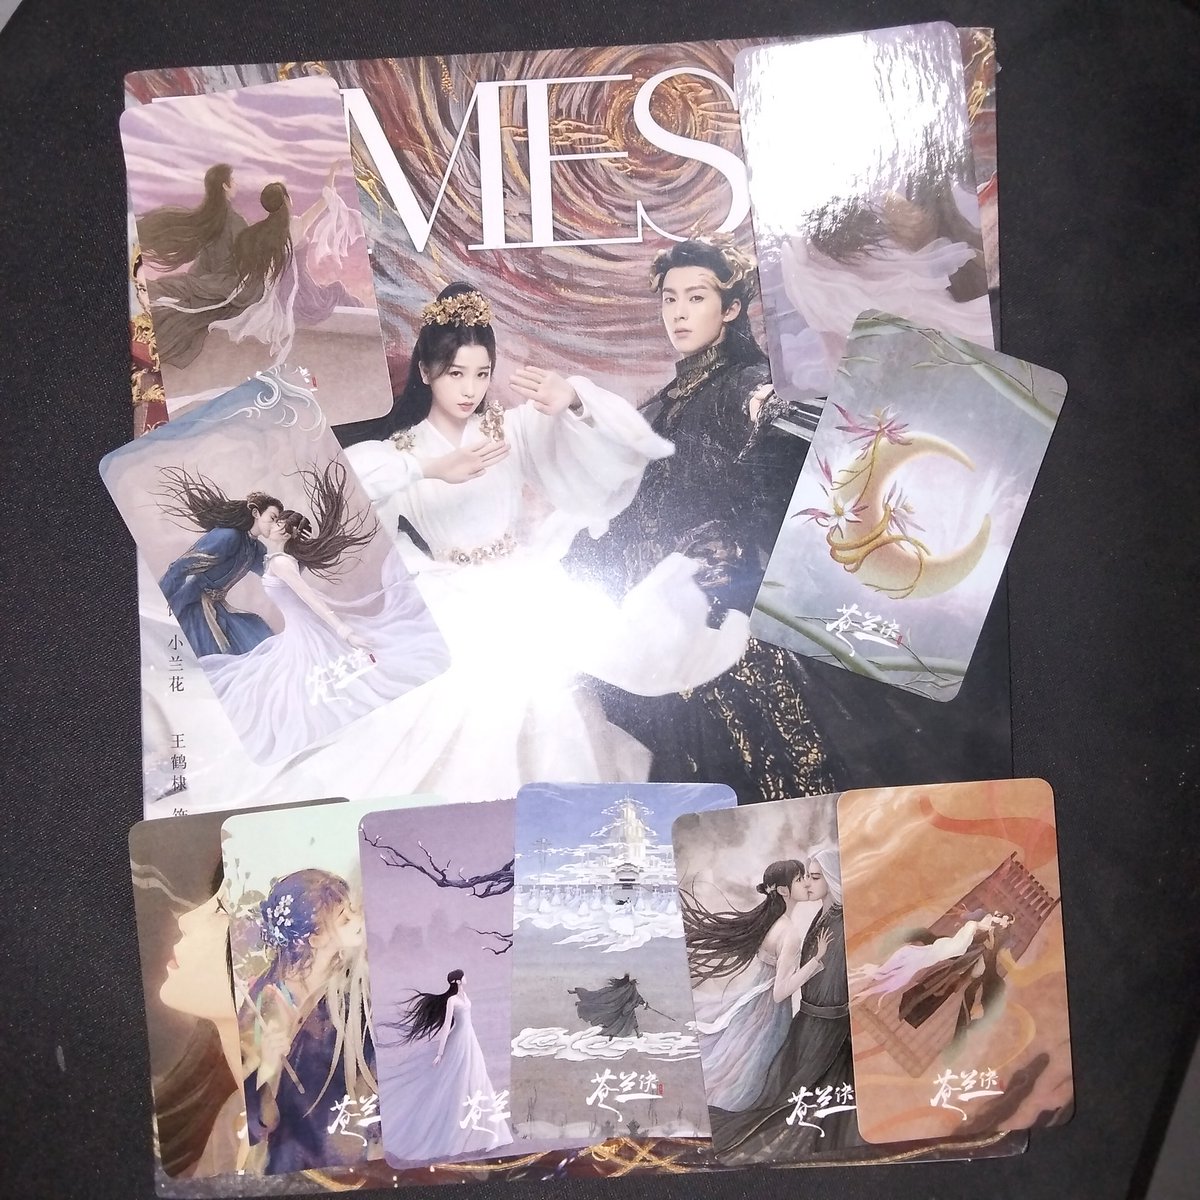 SALE
WTS LFB ph

TIMES Love Between Fairy and Devil Photobook / Magazine + Fanart Photocards

- 600 php + lsf
- sealed, official

mop: gcash
mod: jnt, sco

#EstherYu #DylanWang #YuShuxin #WangHedi #LoveBetweenFairyAndDevil